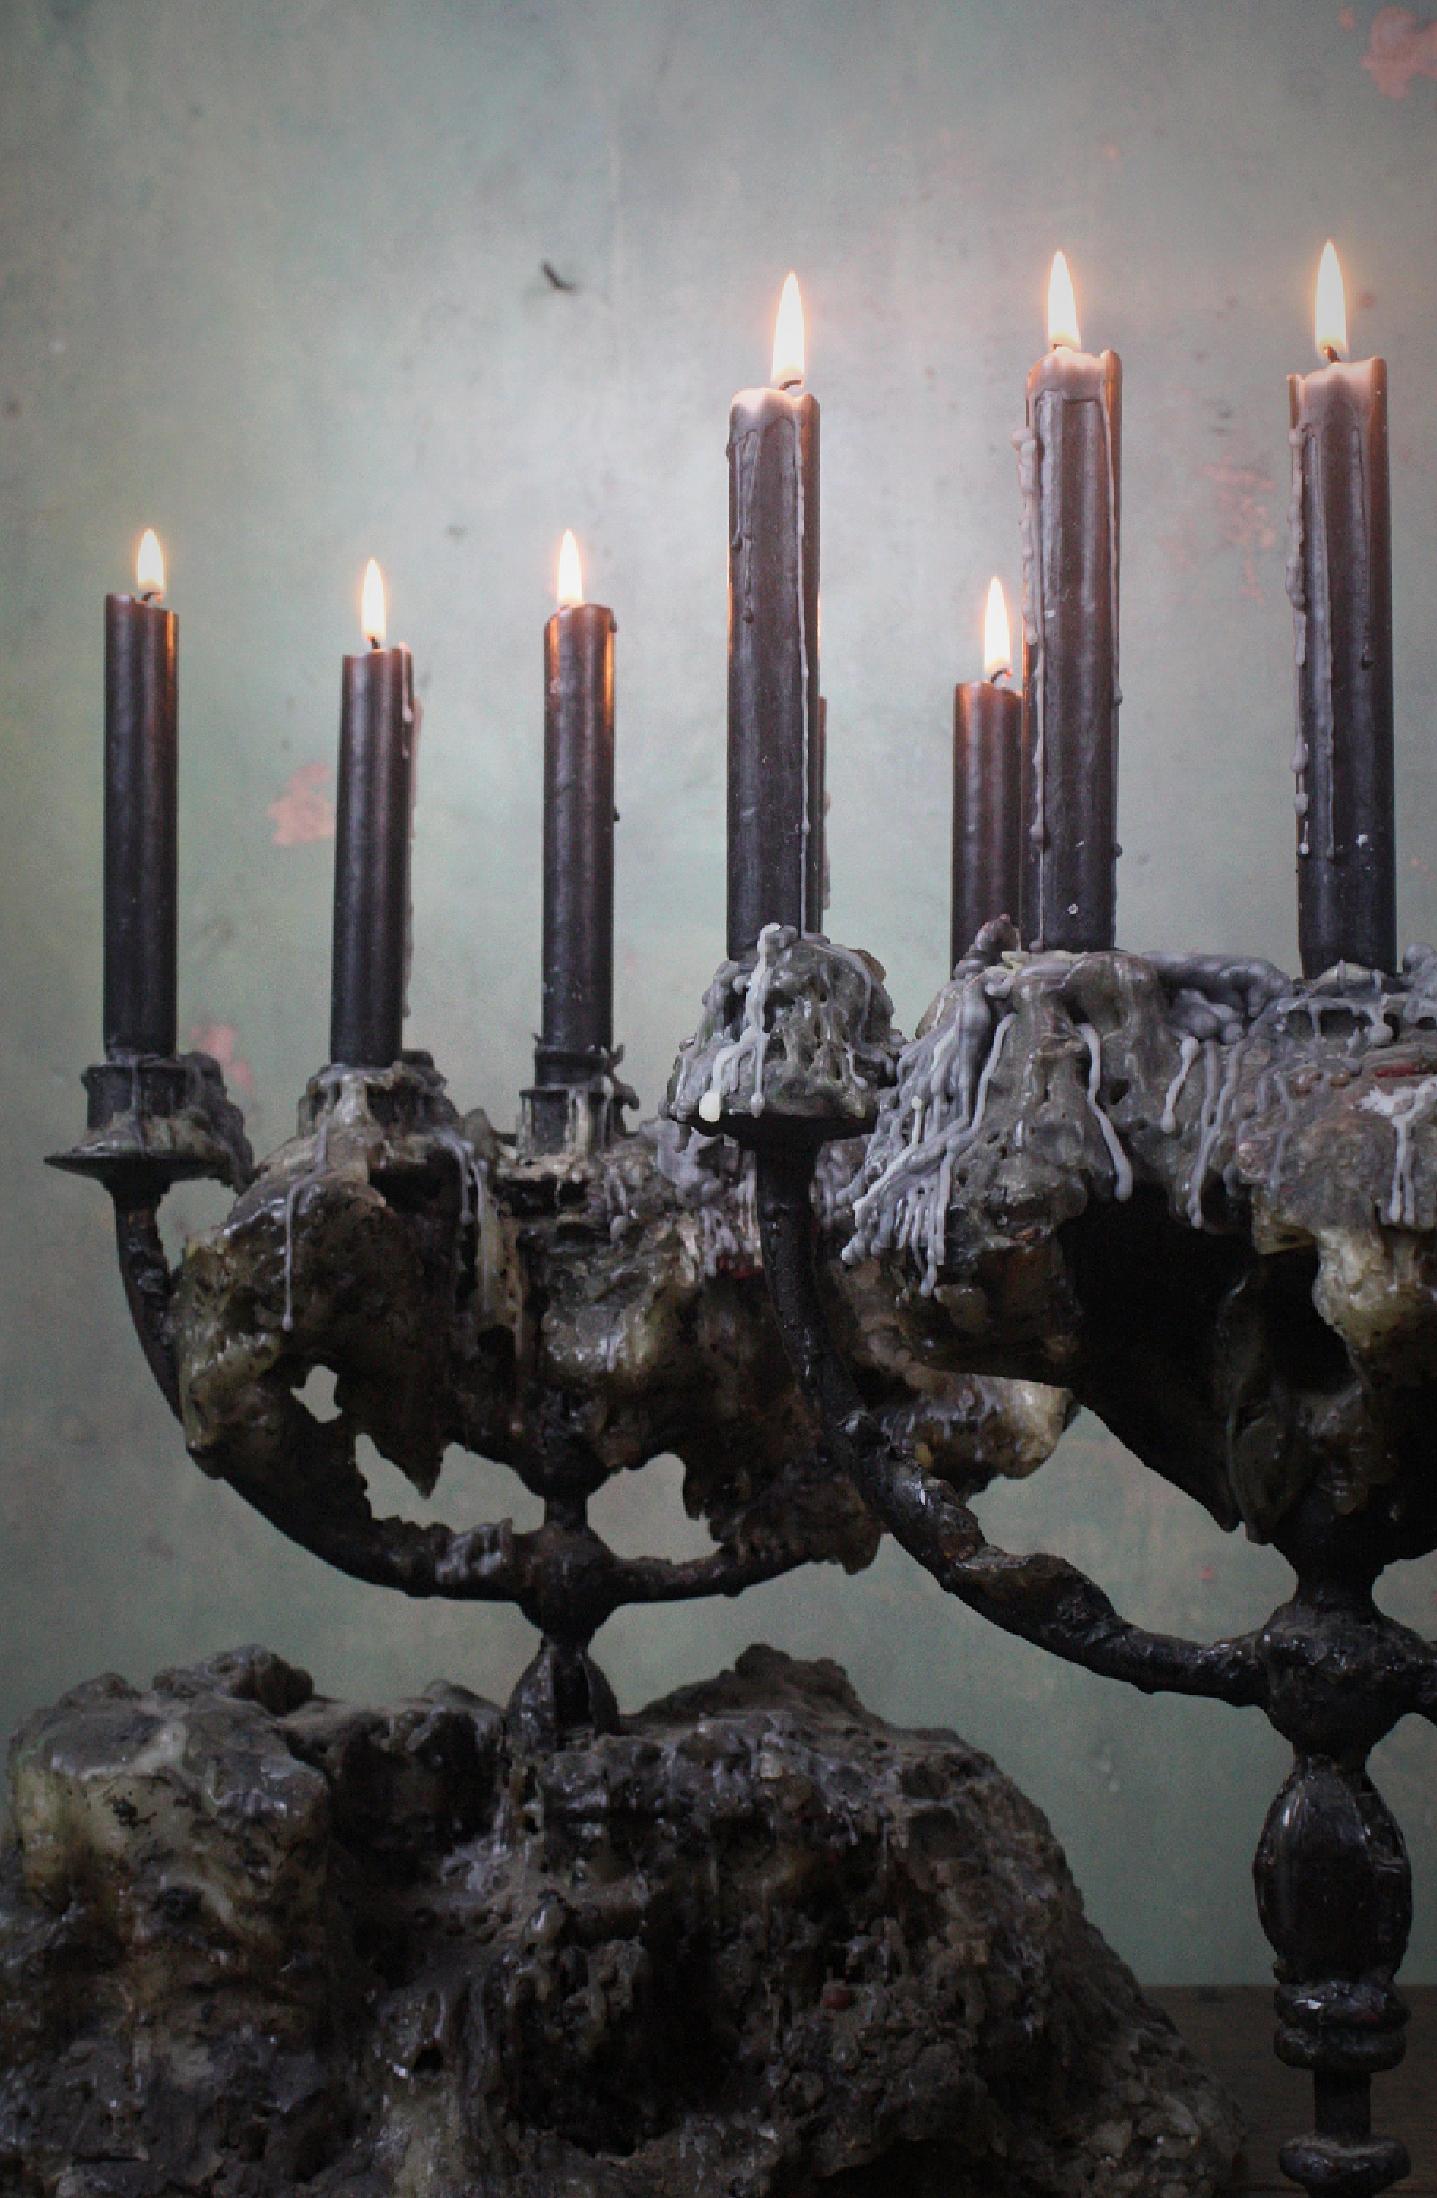 Very decorative pair of 18th century Italian wrought iron candelabras, with a wonderful sculptural concoction of wax build up 

The candelabra with the larger amount of wax is approximate 43cm in width at base 

The pair are 50cm in height